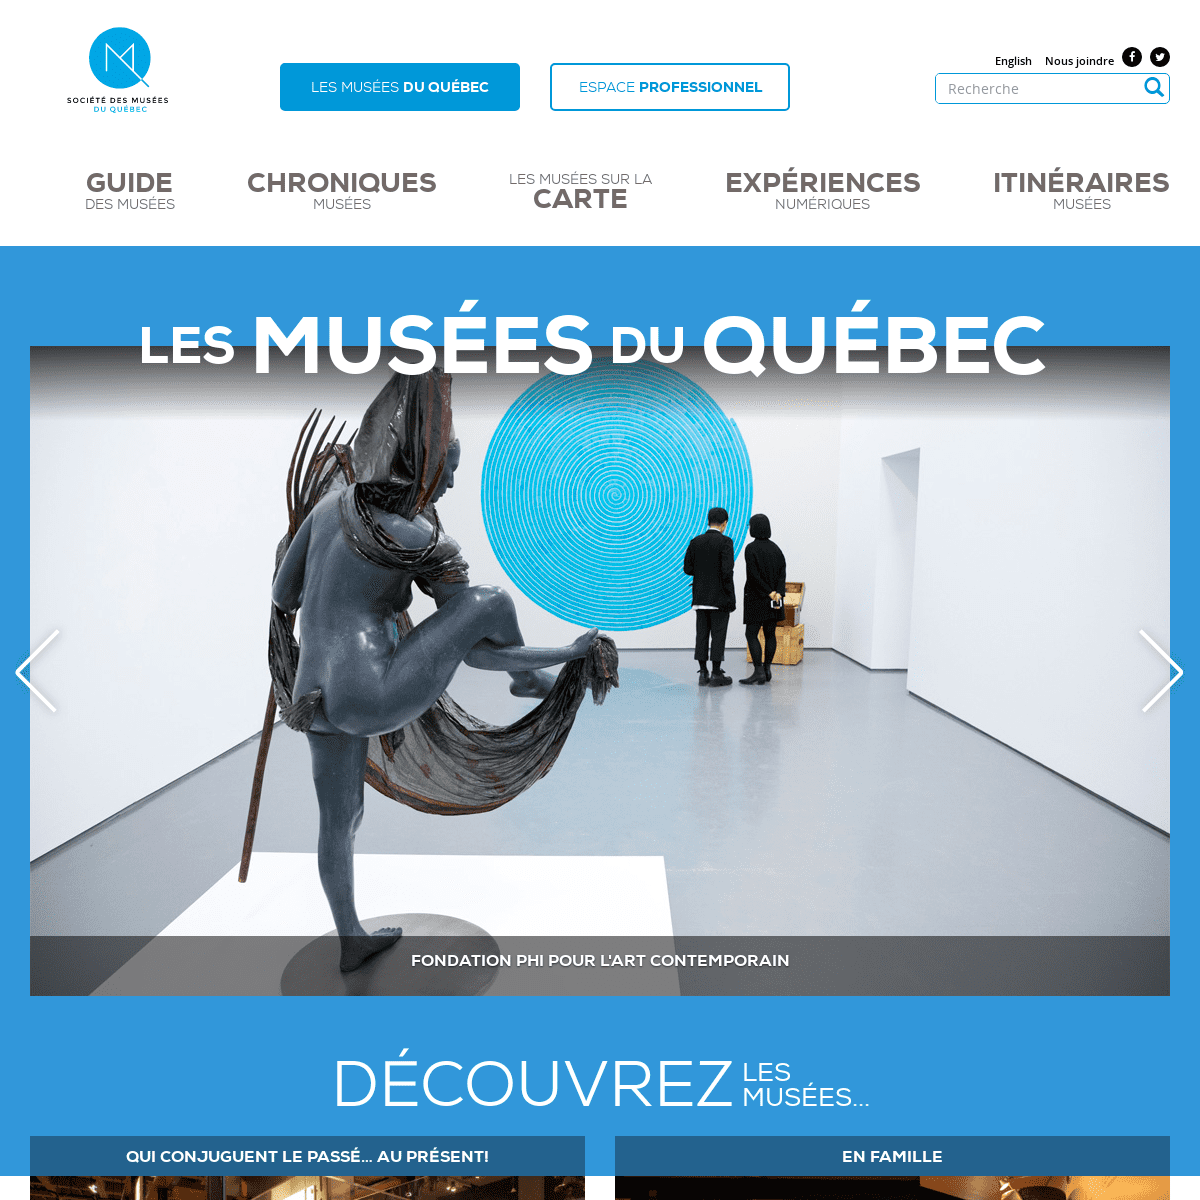 A complete backup of musees.qc.ca